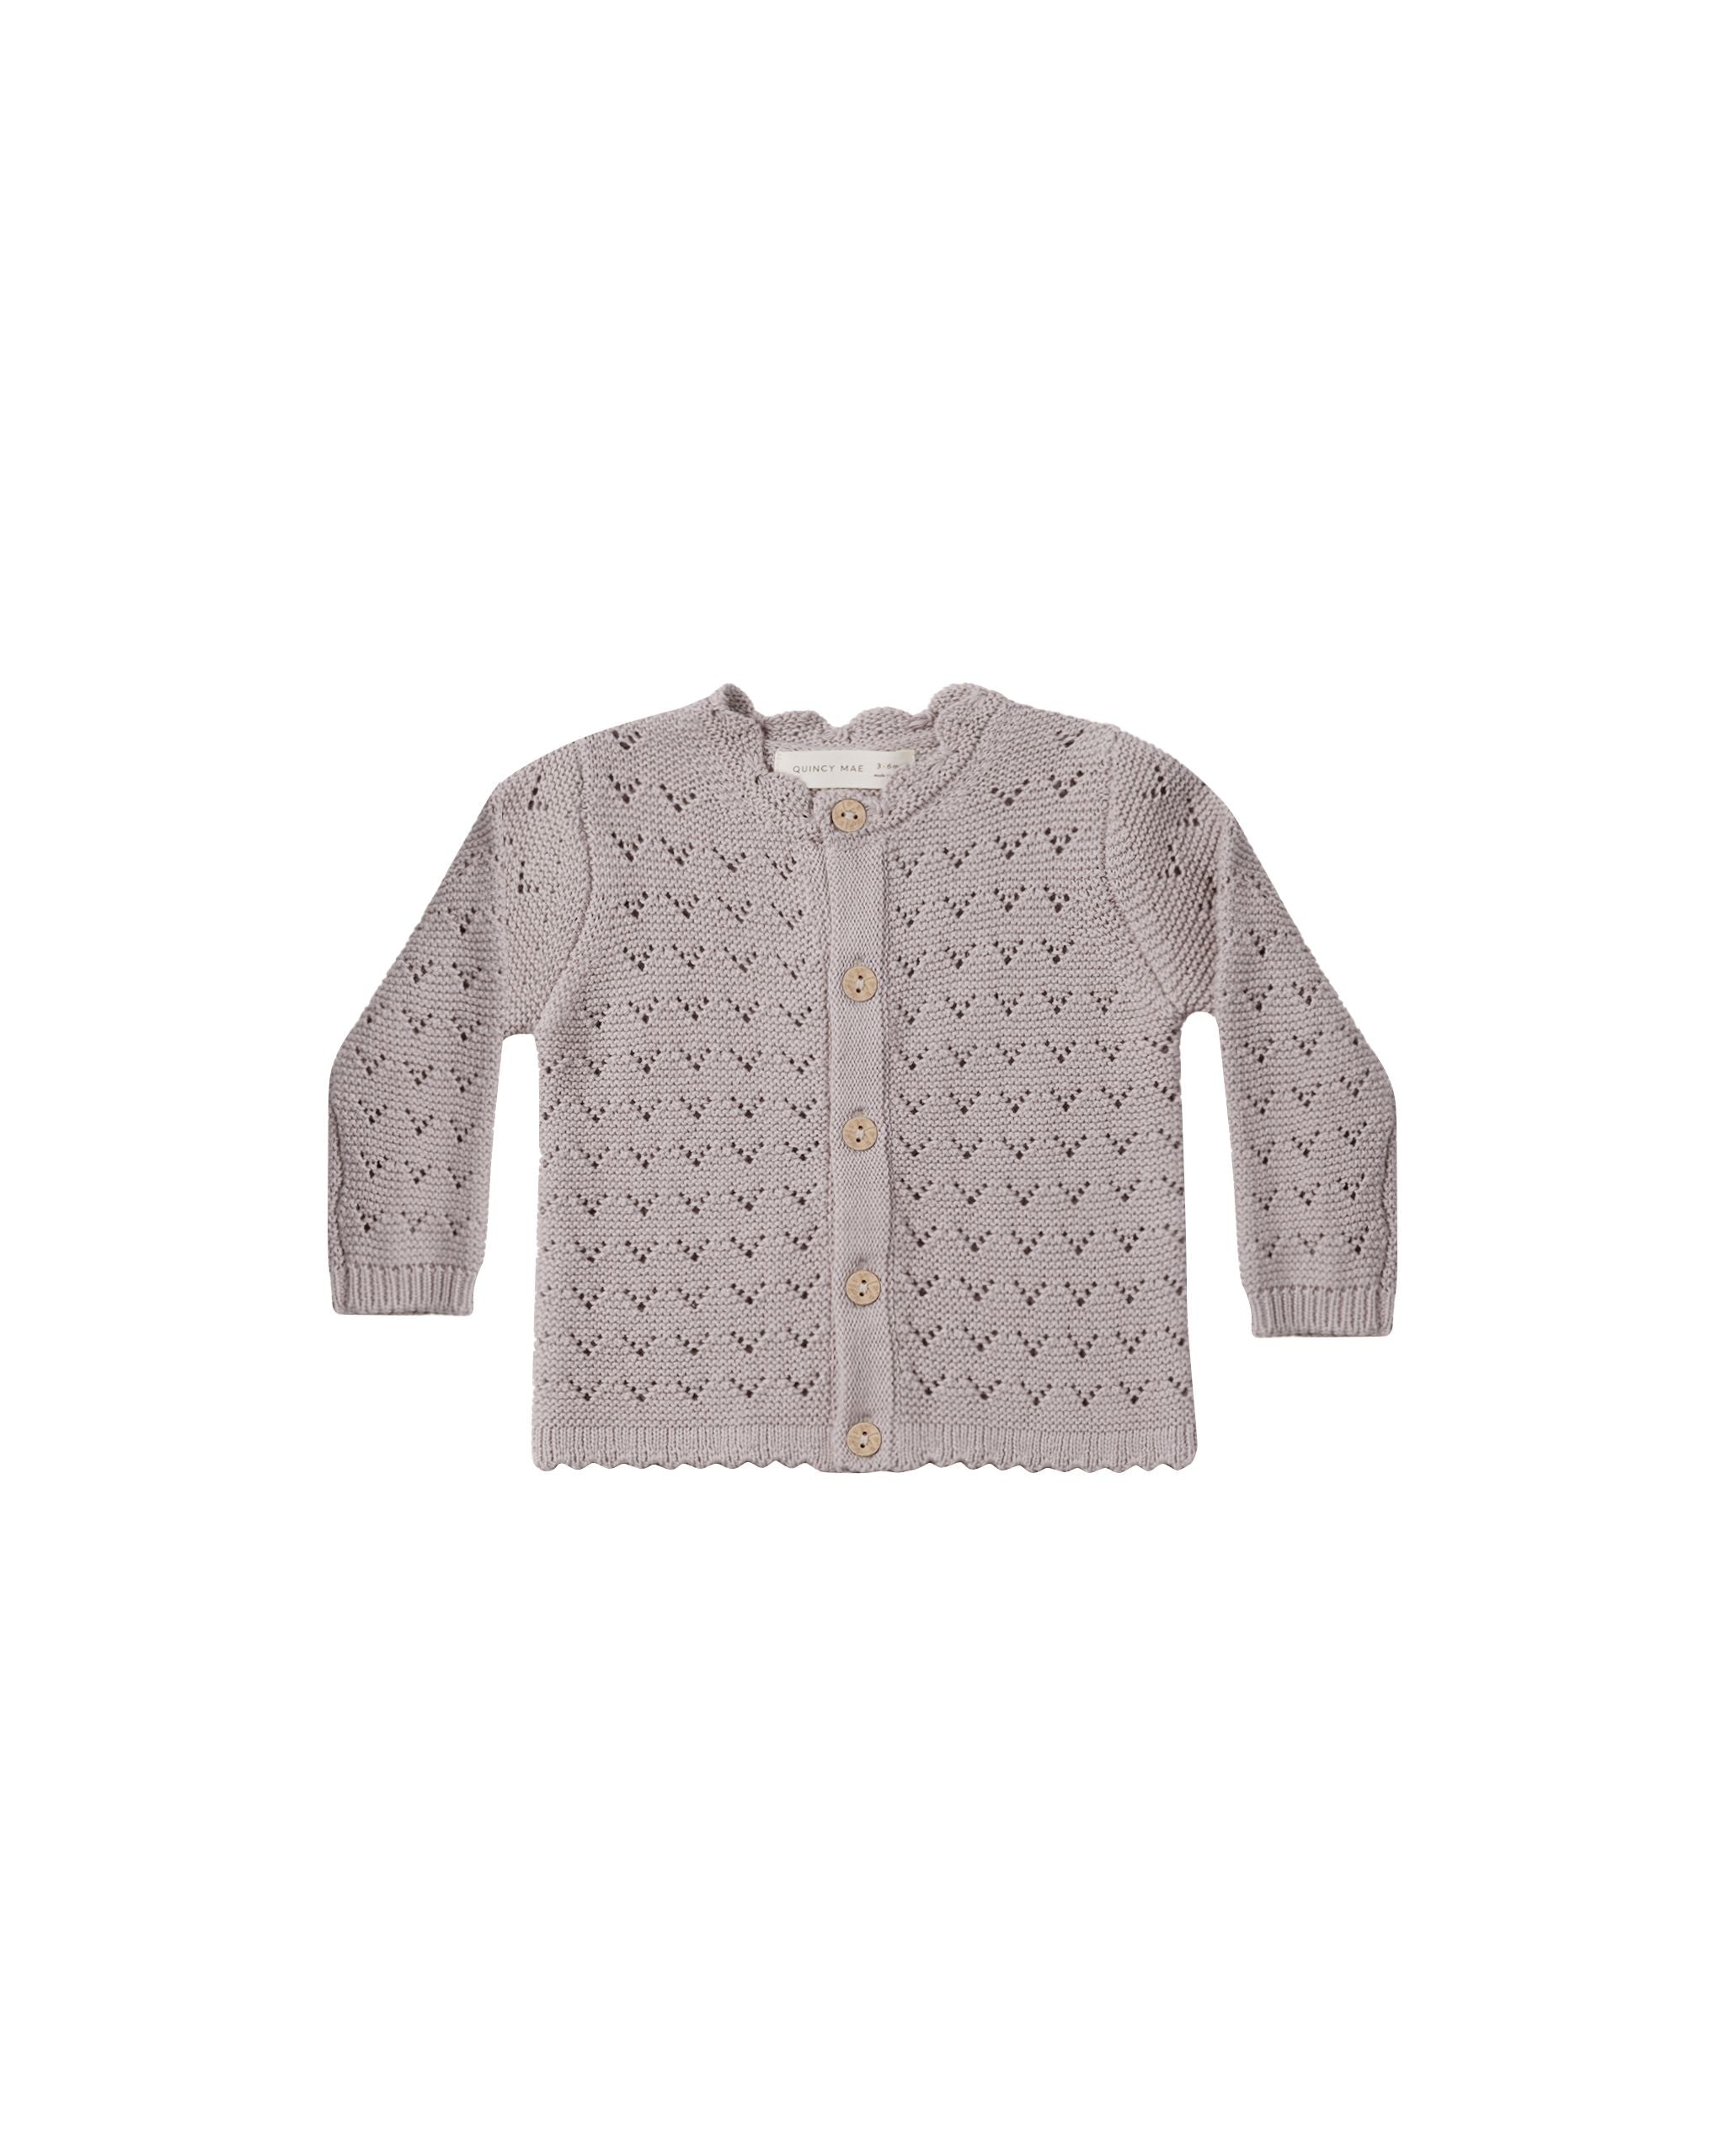 Quincy Mae - Scalloped Cardigan